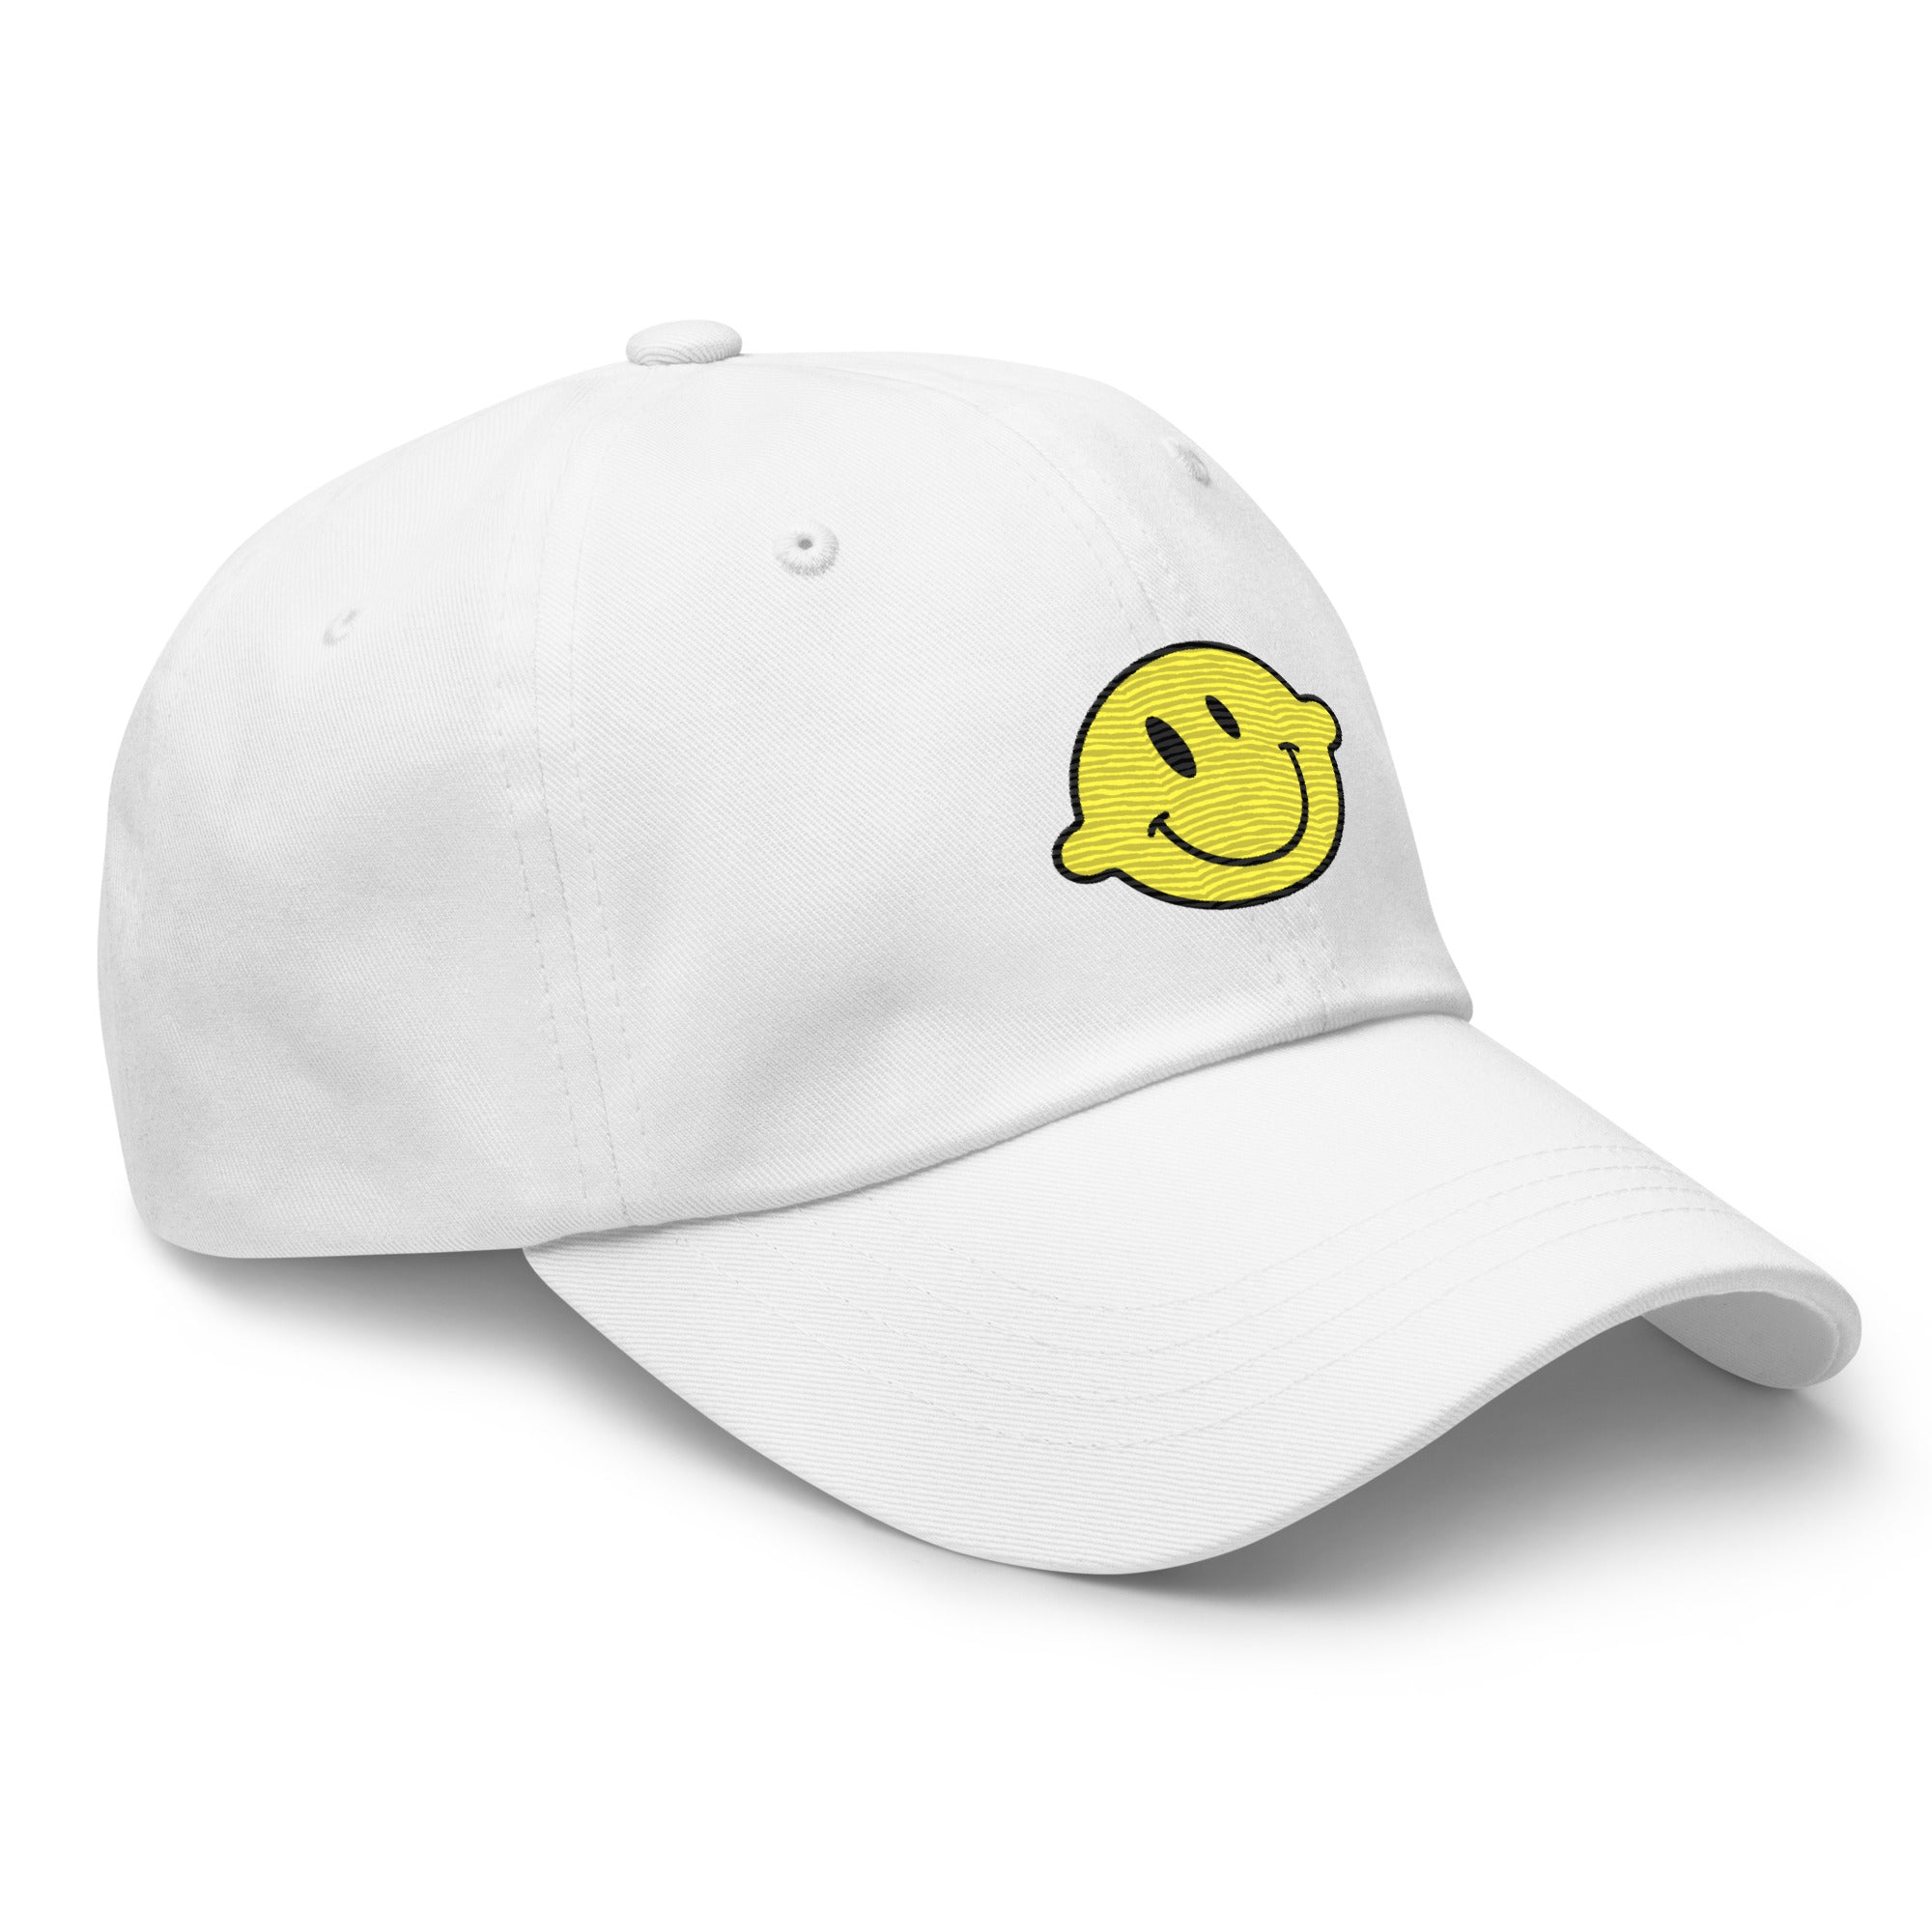 classic-dad-hat-white-right-front-64d64e7dd46f2.jpg